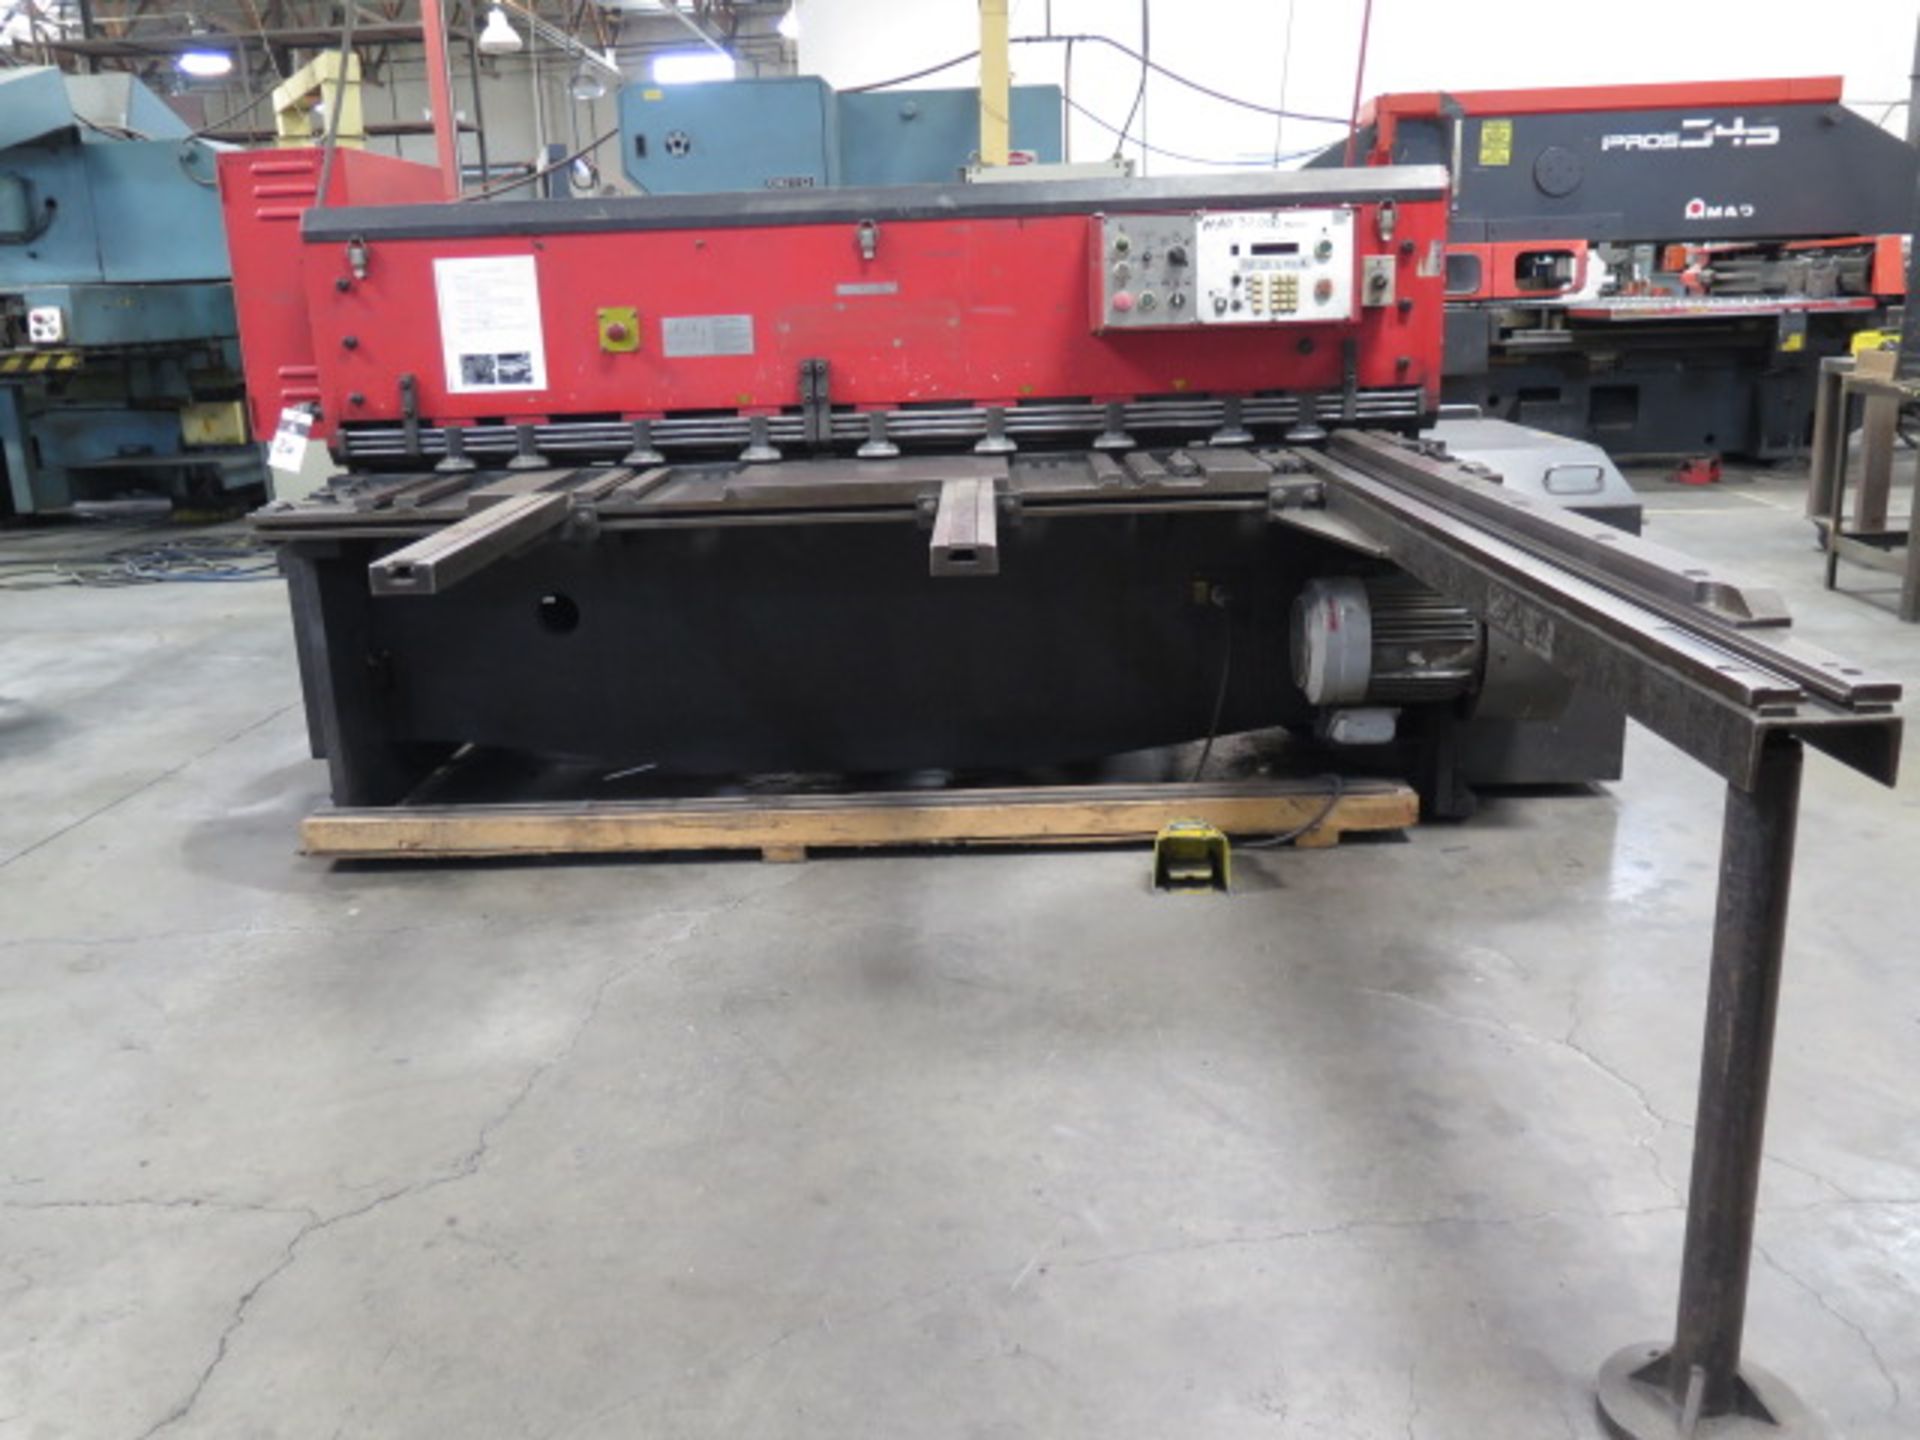 Amada M-2060 ¼” x 78” Power Shear s/n 20600686 w/ Amada Controls and Back Gauging, SOLD AS IS